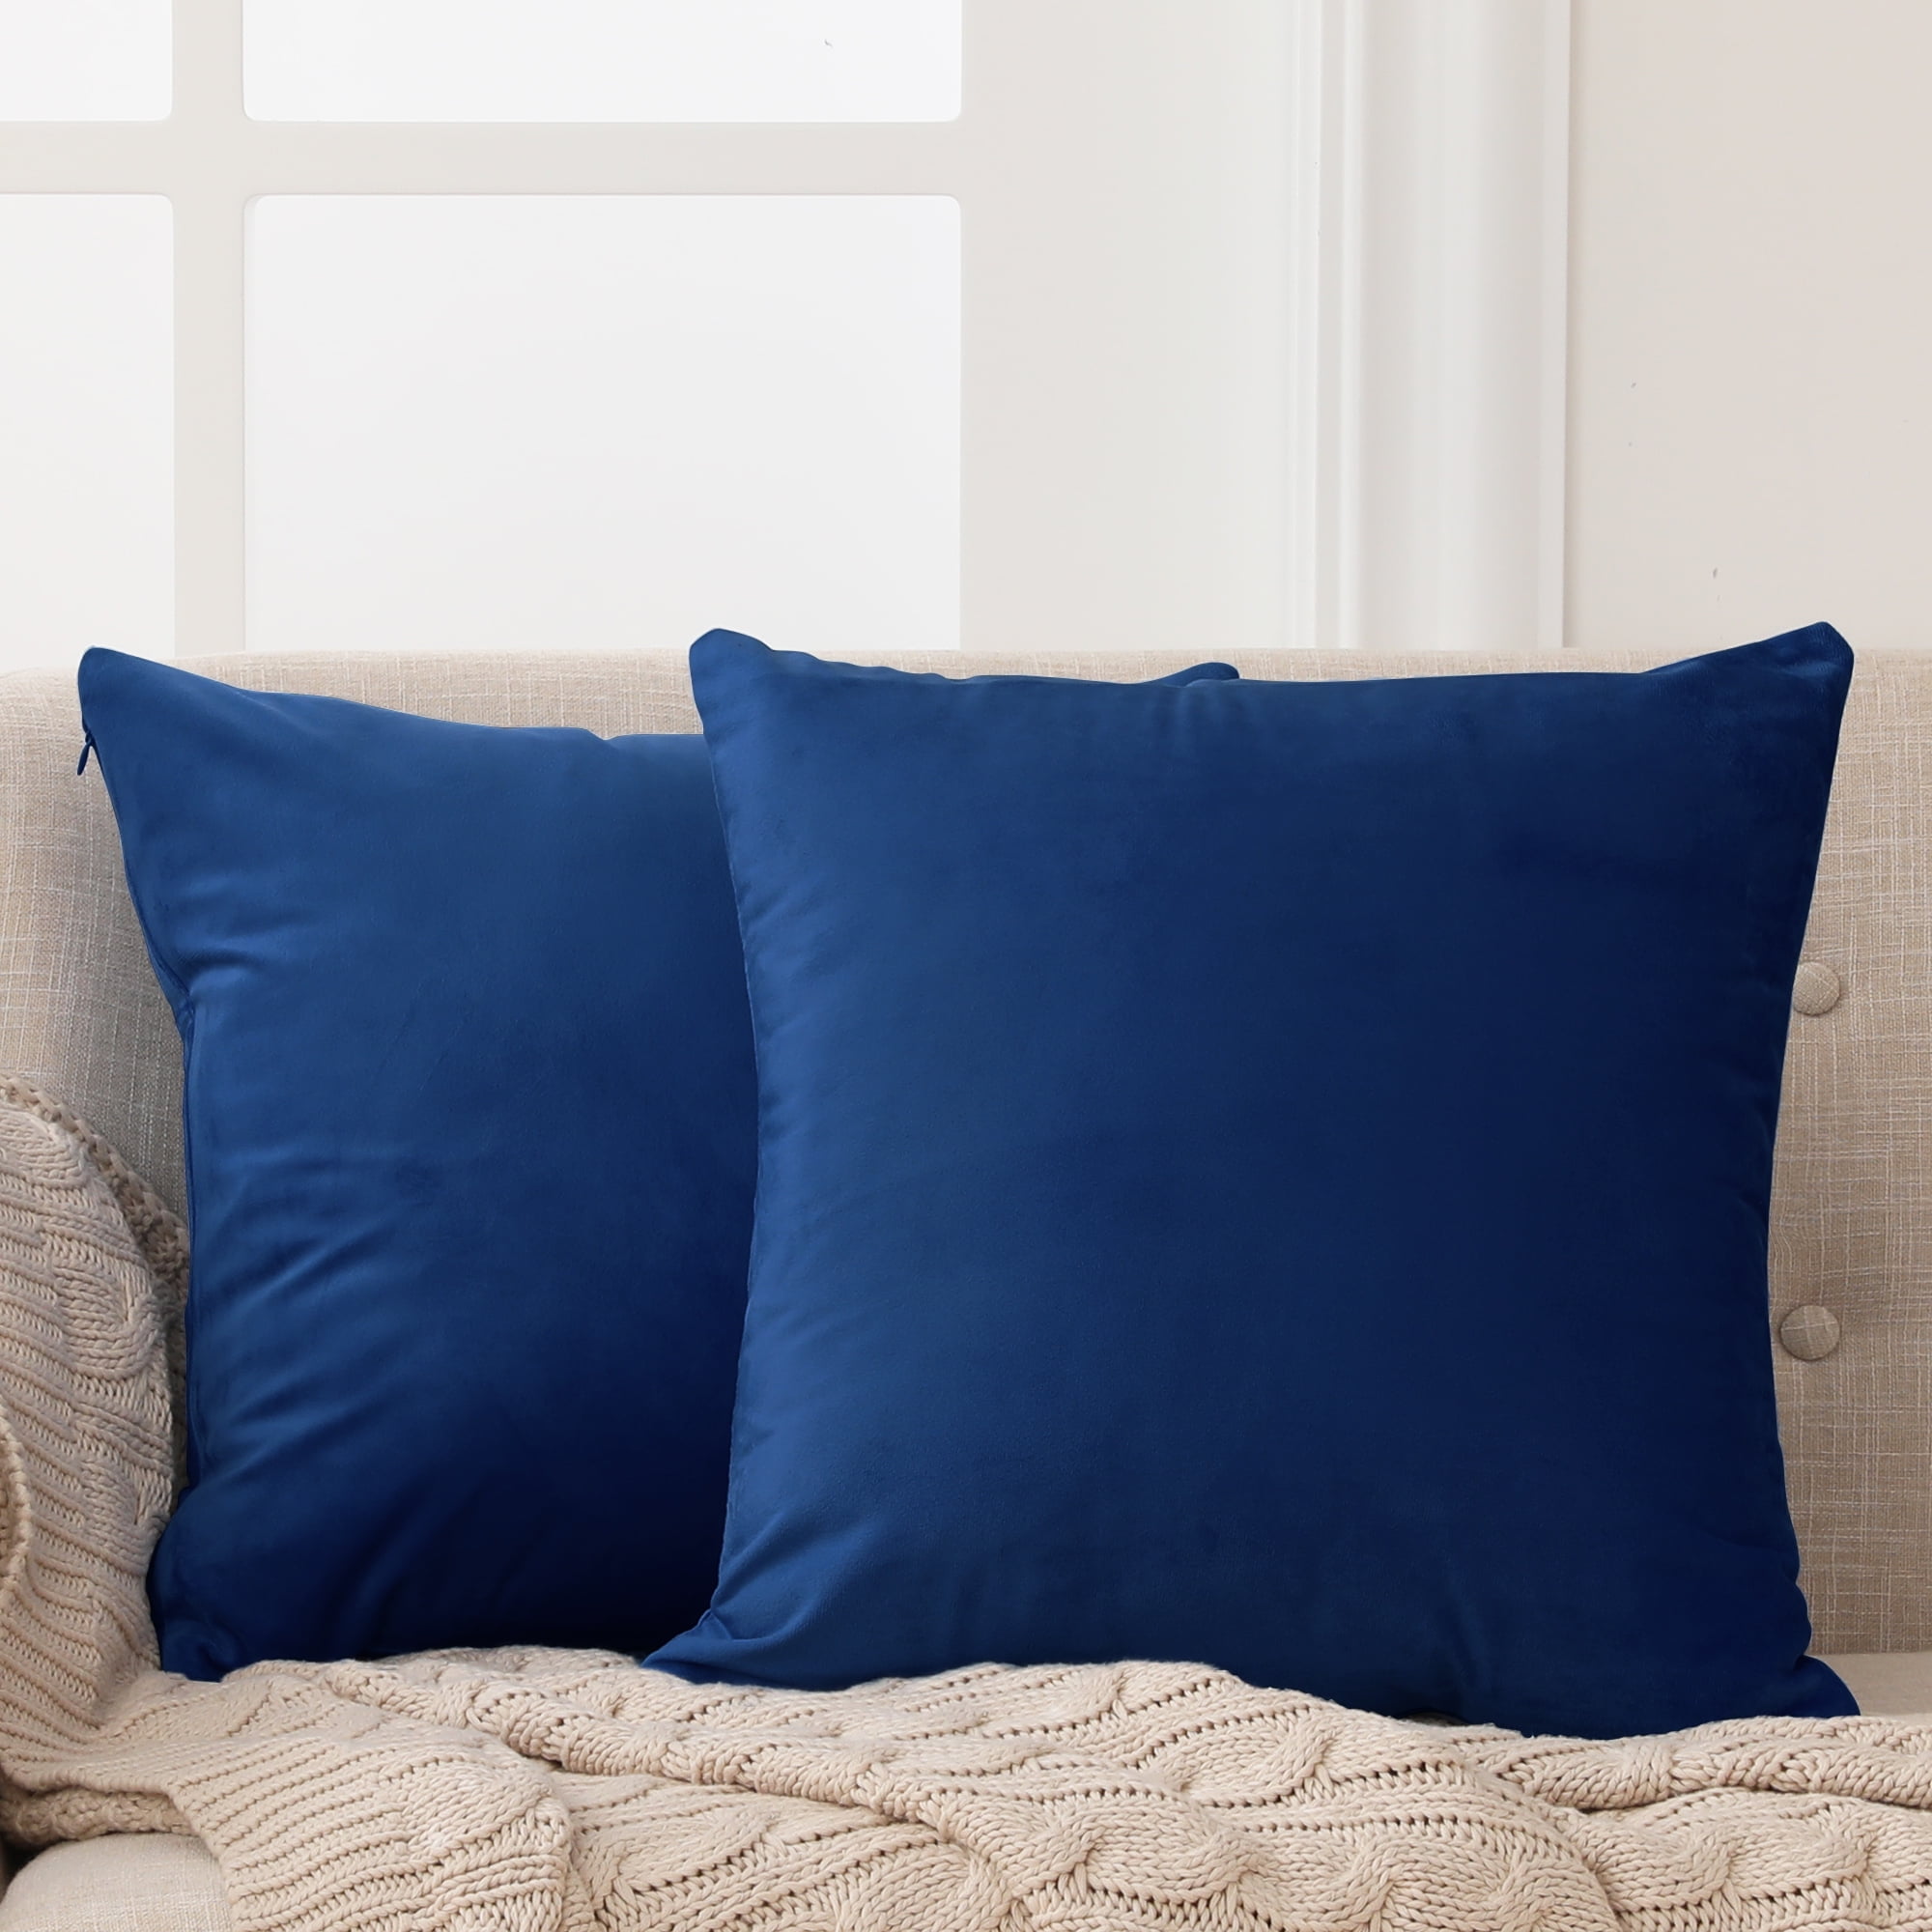 Comvi Blue Throw Pillows with Inserts Included - Decorative Pillows,  Inserts & Covers - (2 Throw Pillows + 2 Pillow Covers) - Velvet Throw  Pillows for